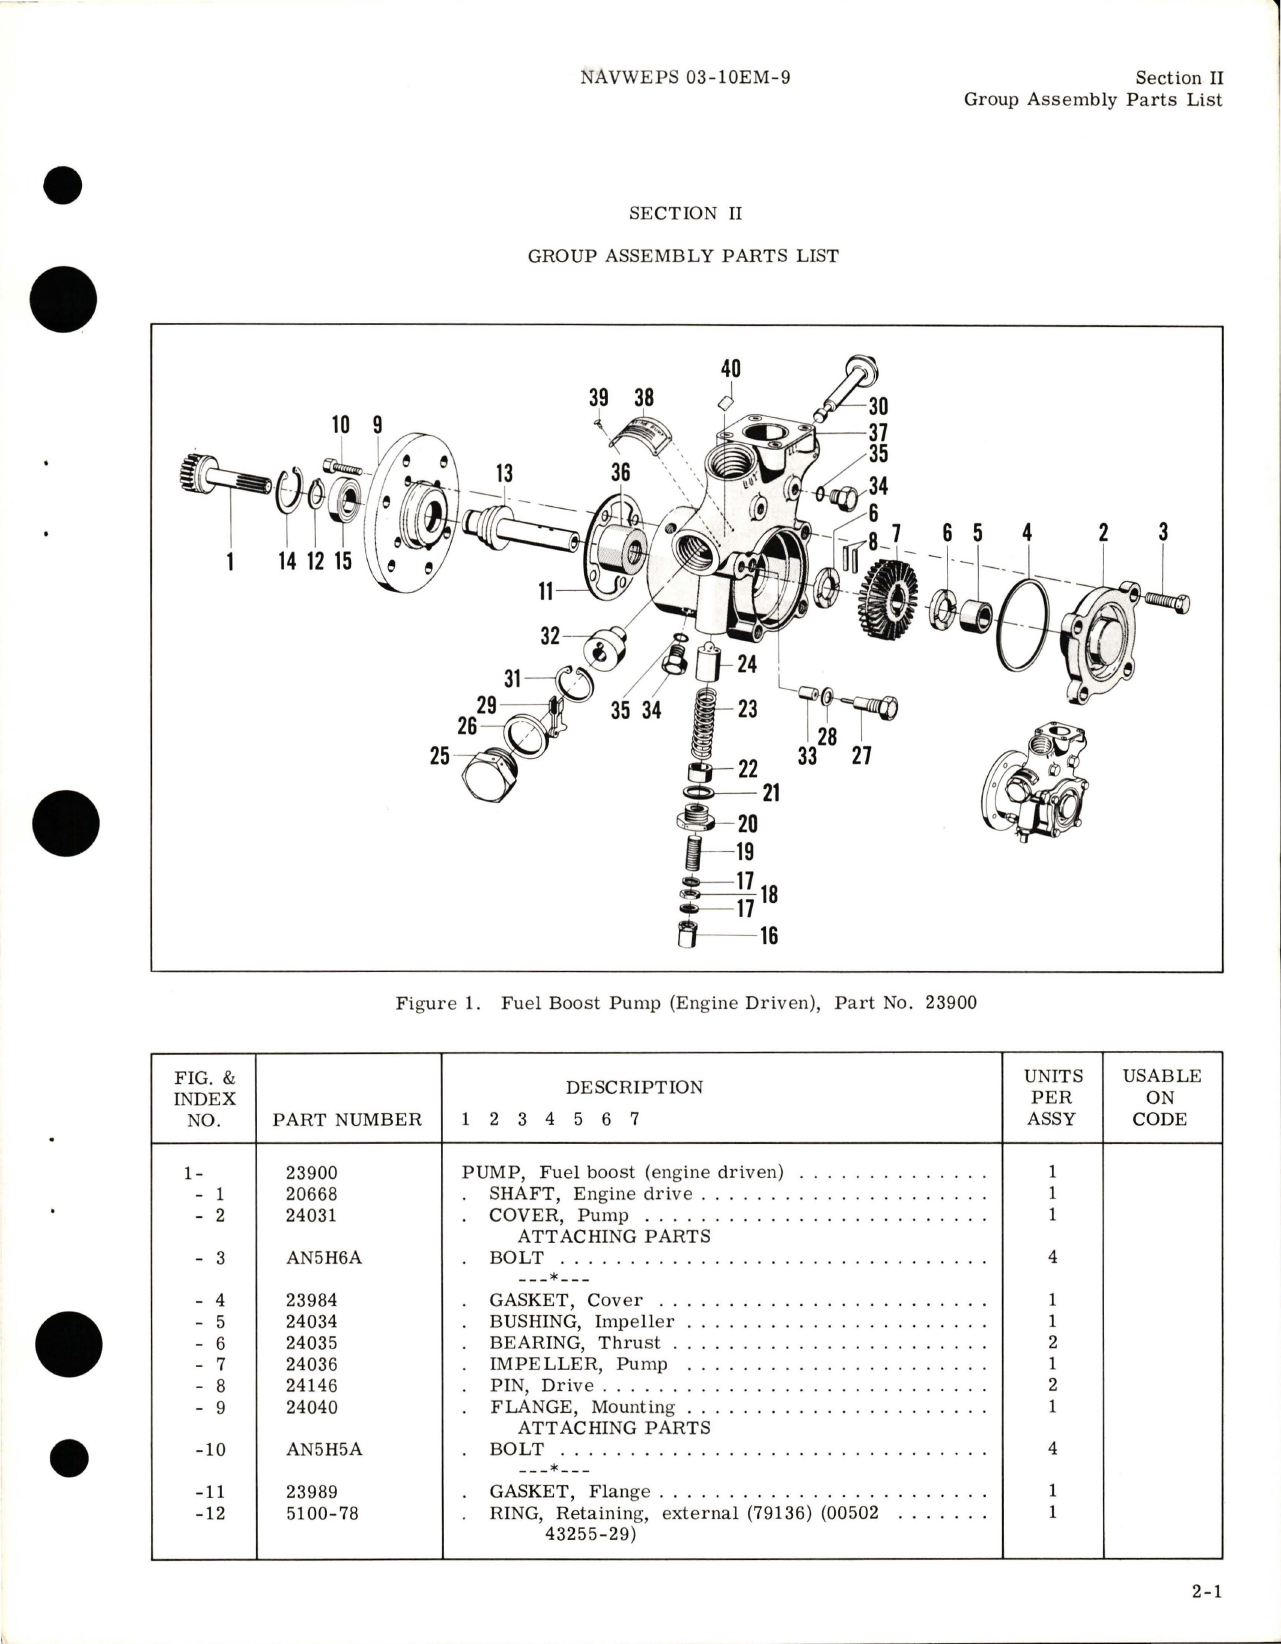 Sample page 7 from AirCorps Library document: Illustrated Parts Breakdown for Fuel Boost Pump (Engine Driven) - Part 23900 and 50138 